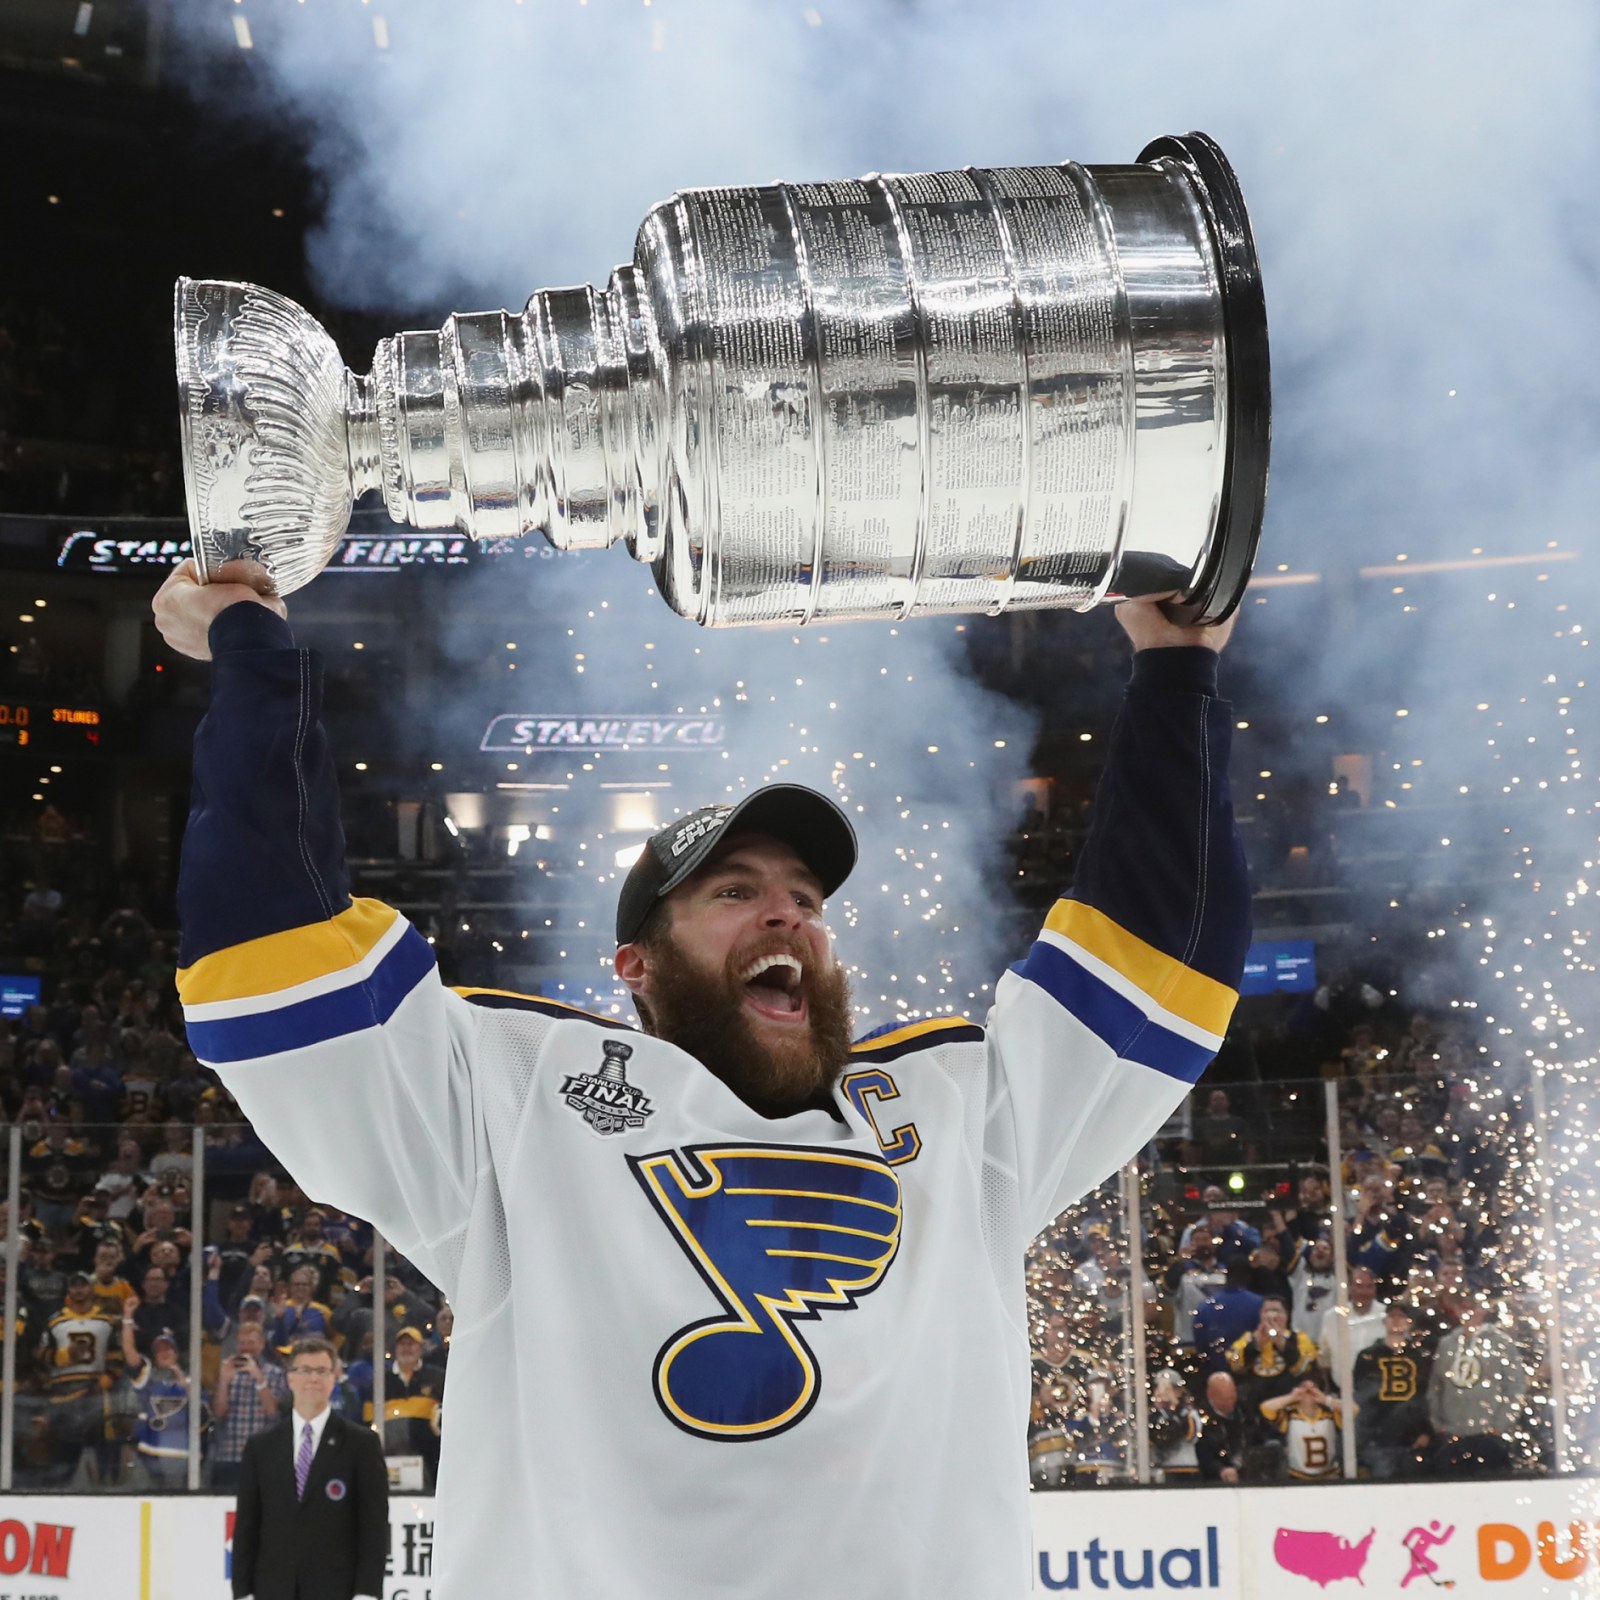 St. Louis welcomes home Blues with Stanley Cup parade - The Washington Post